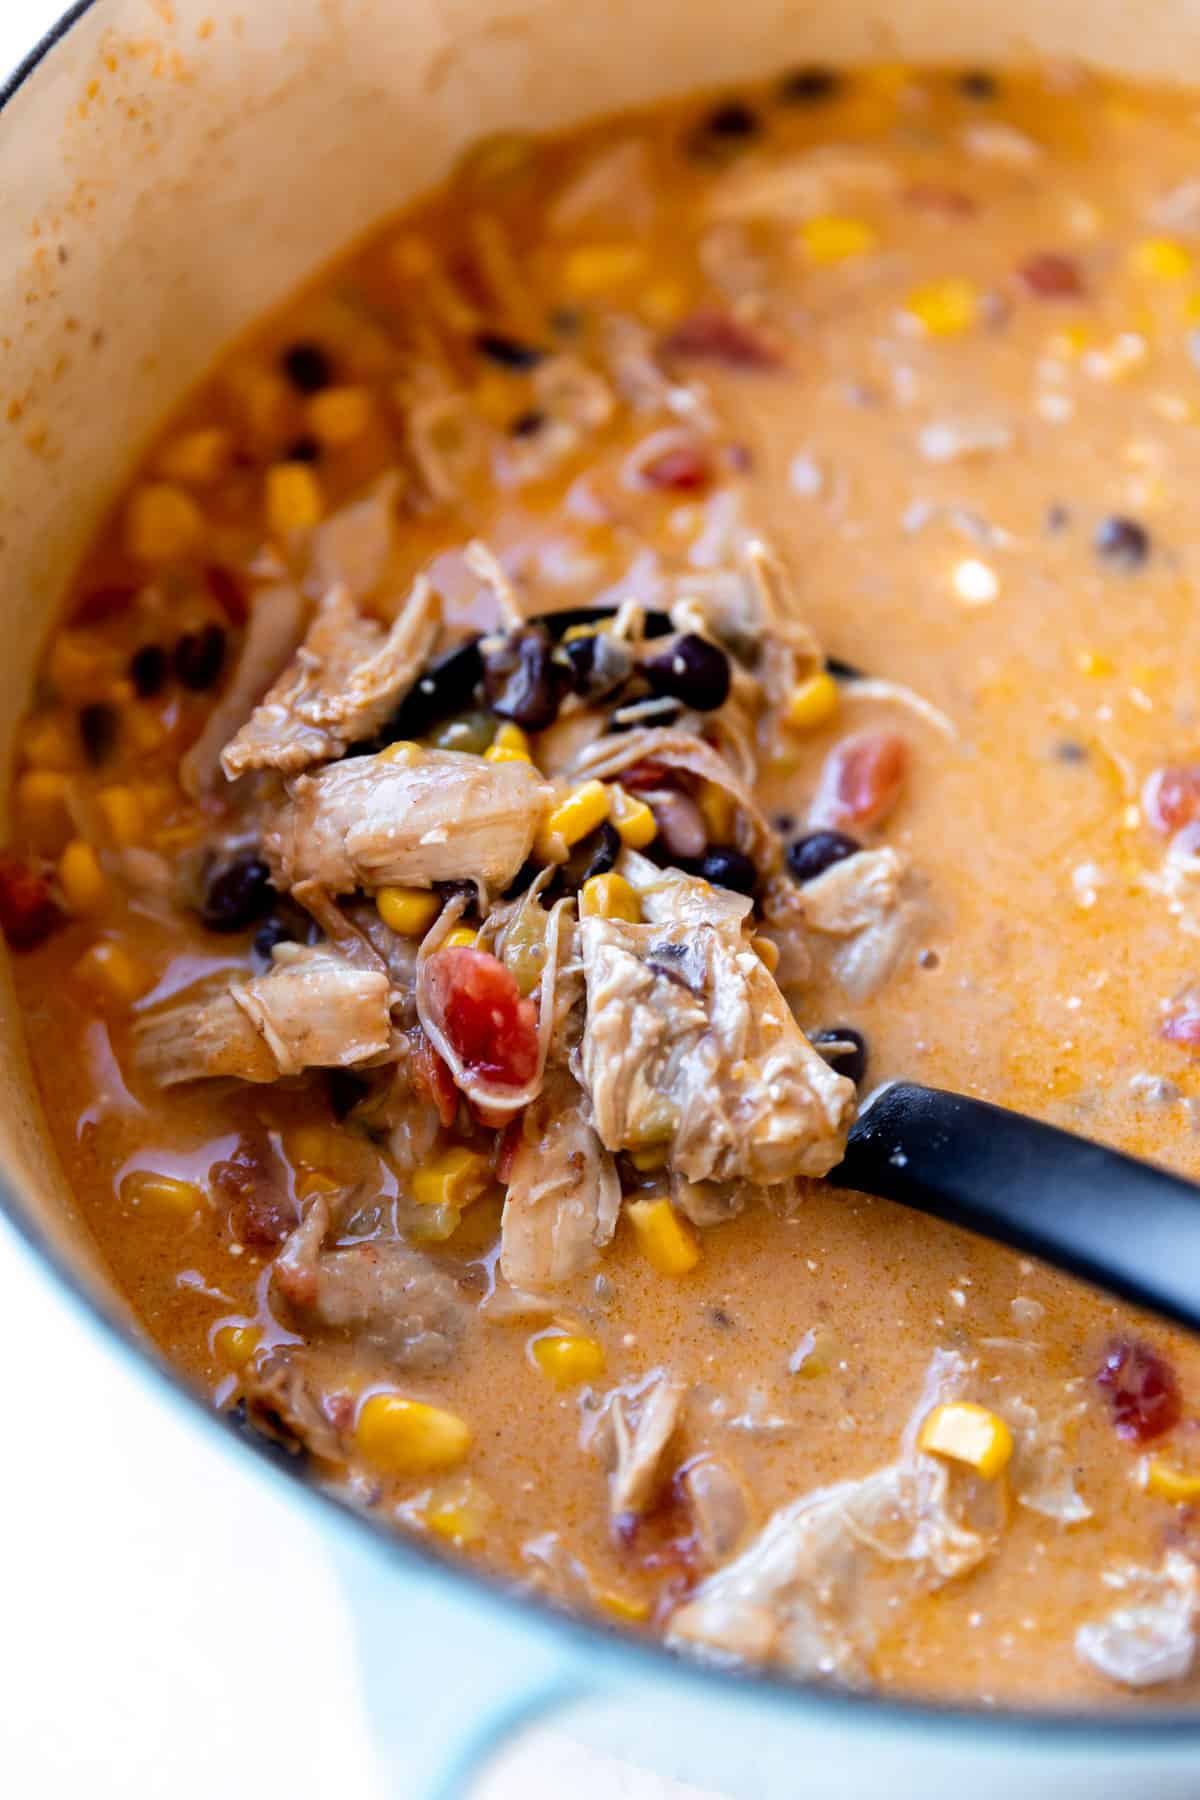 Ladle scooping up shredded chicken, beans, corn and diced tomato in a creamy broth.